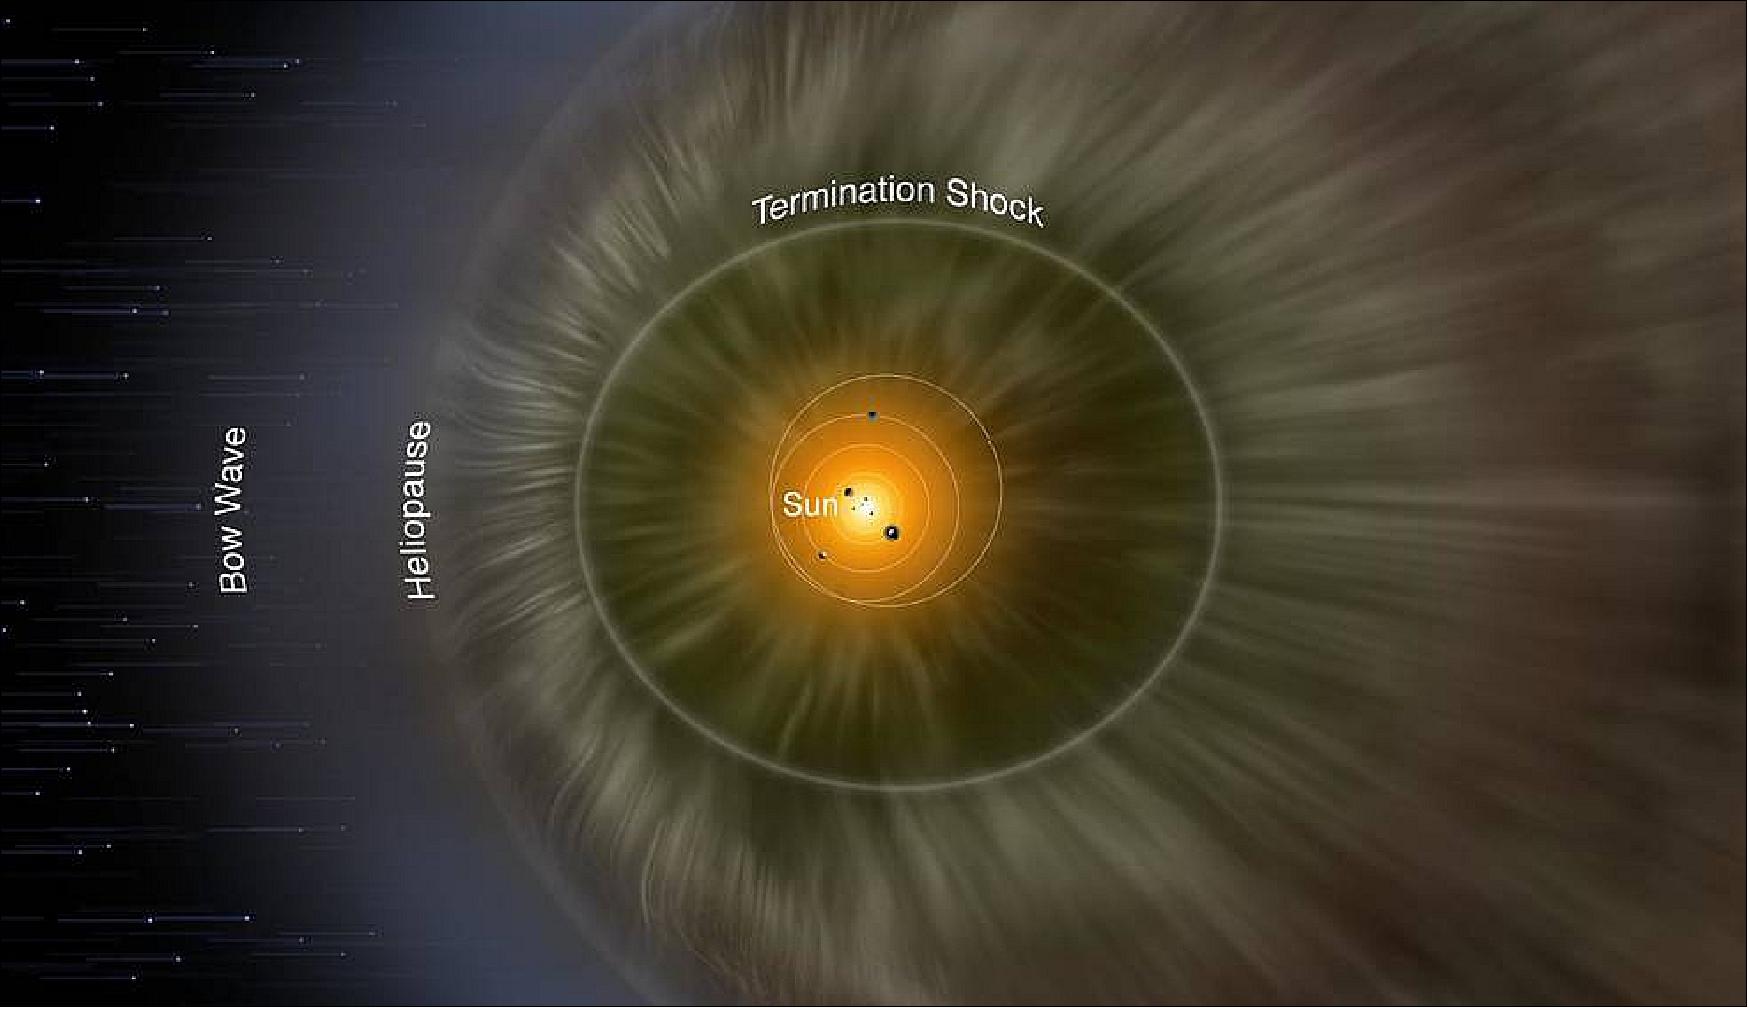 Figure 10: An illustration depicting the layers of the heliosphere (image credit: NASA/IBEX/Adler Planetarium)